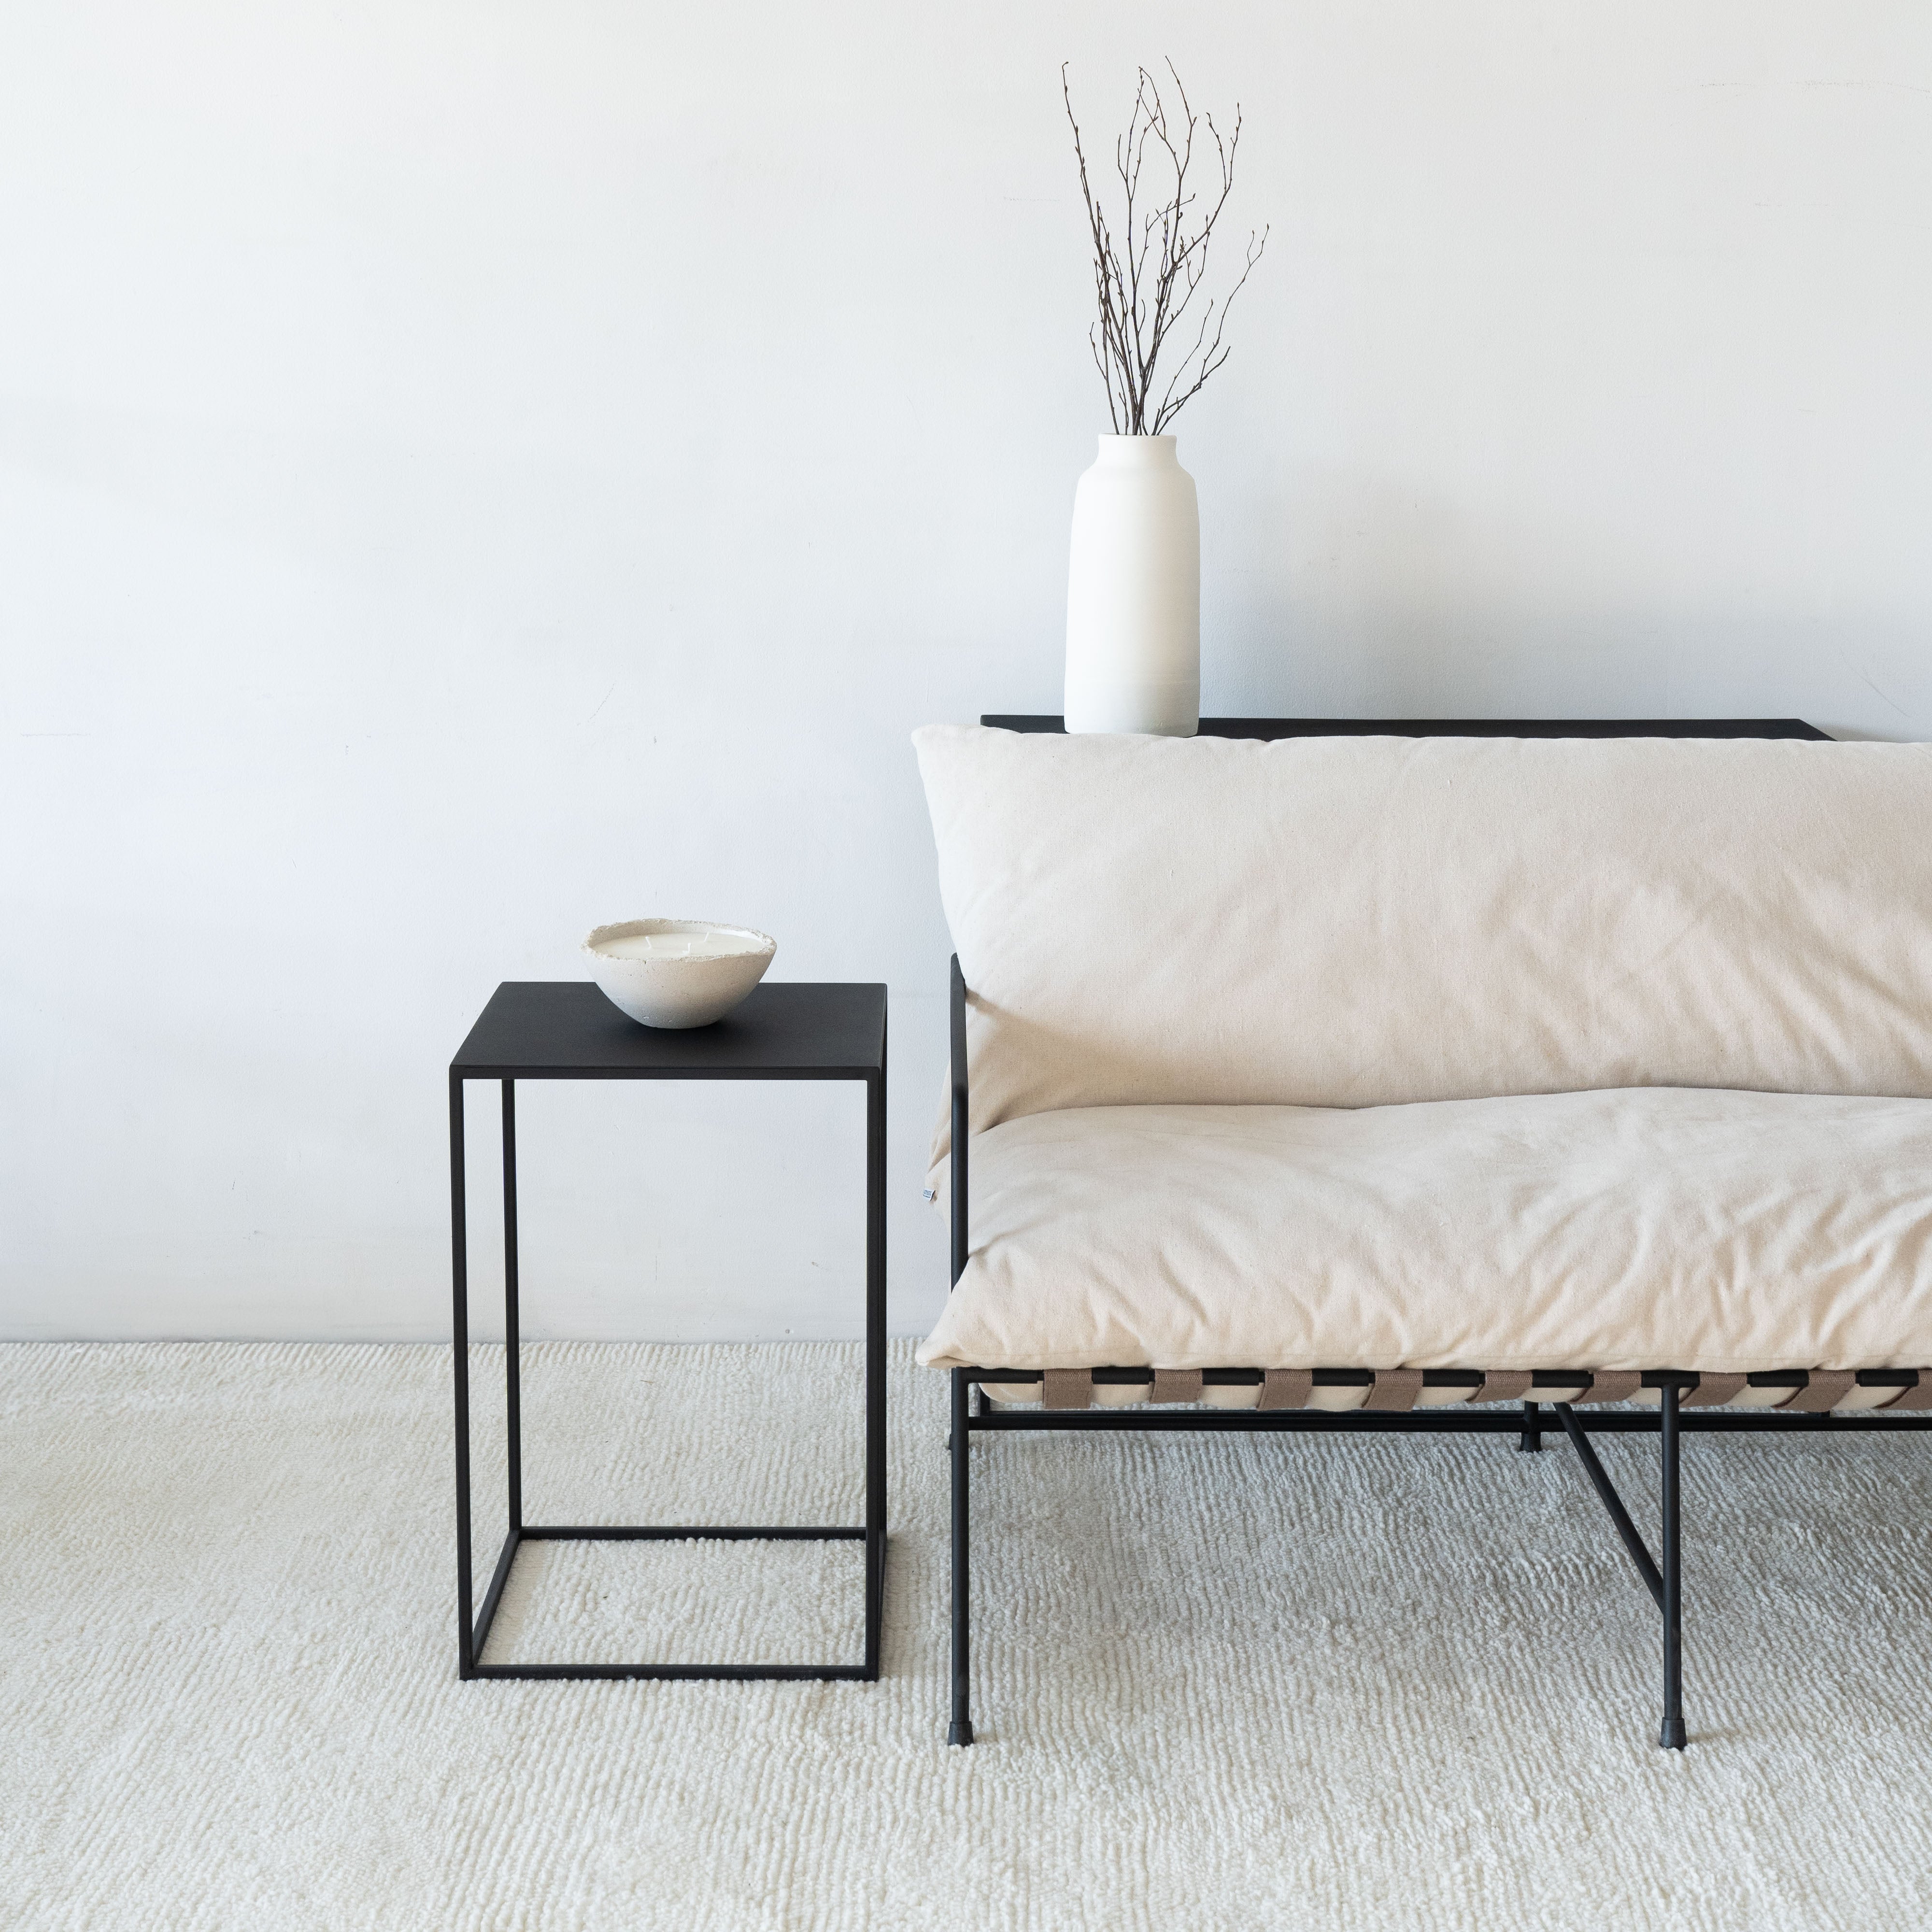 Monochrome Side Table - Wood and Steel Furnitures